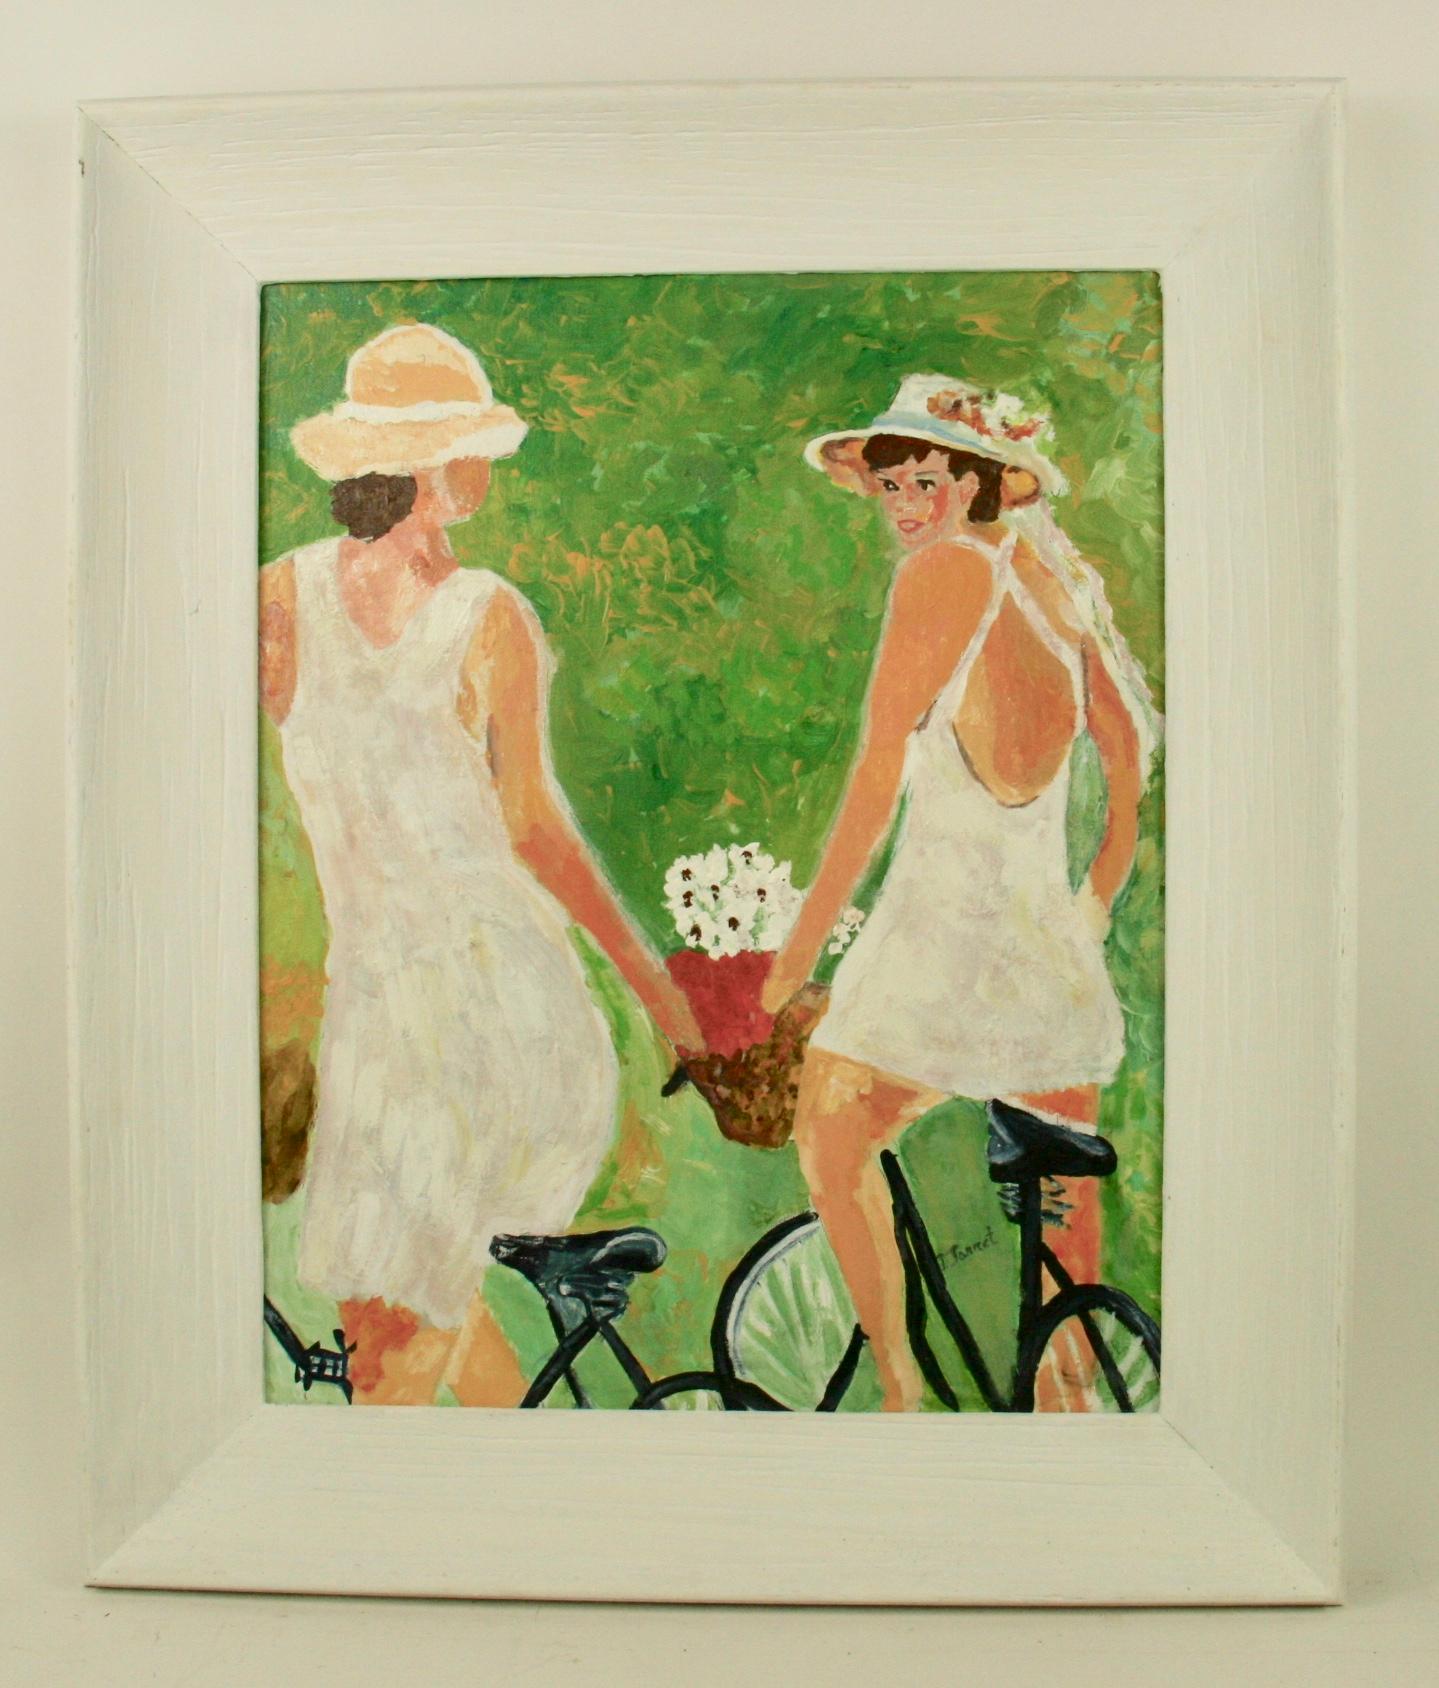  Summer in the Hamptons  Figurative Painting 7